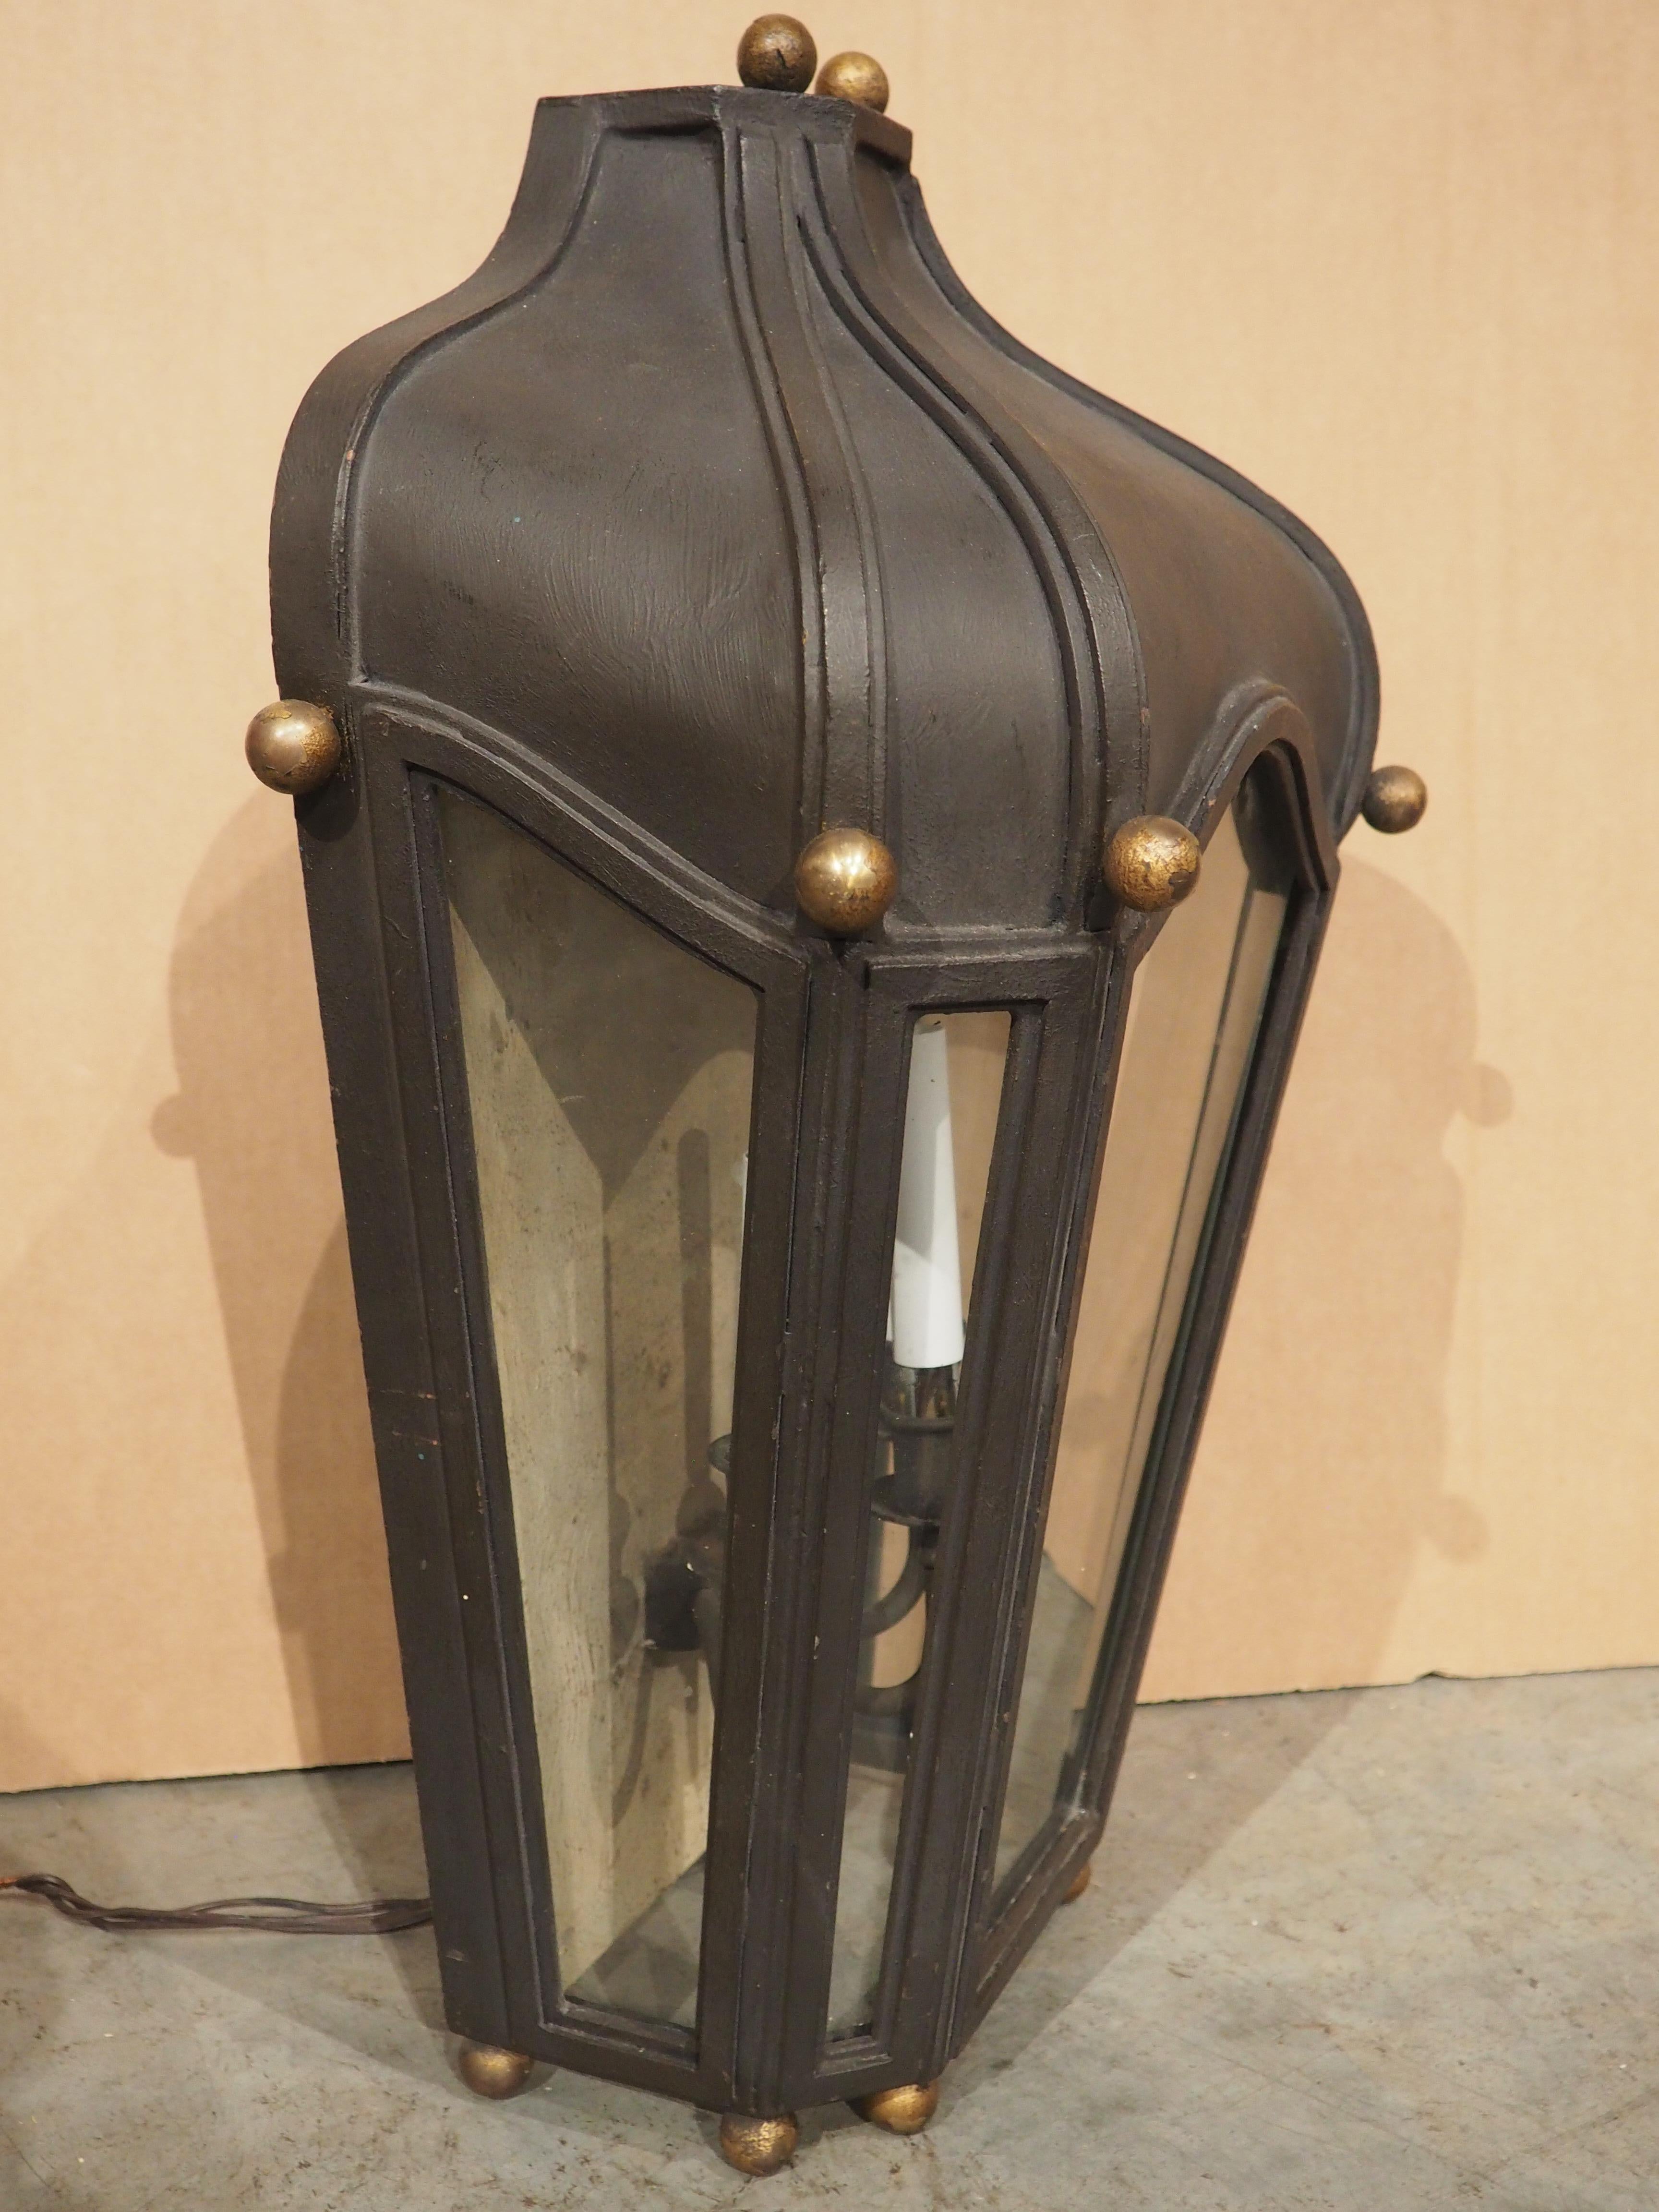 The flat back of this wrought iron lantern with glass allows it to be hung architecturally from any wall of the house. Five panes of glass enclose a three-arm sconce with saucer bobeches. Each arm has a gentle C-scroll shape beneath white faux